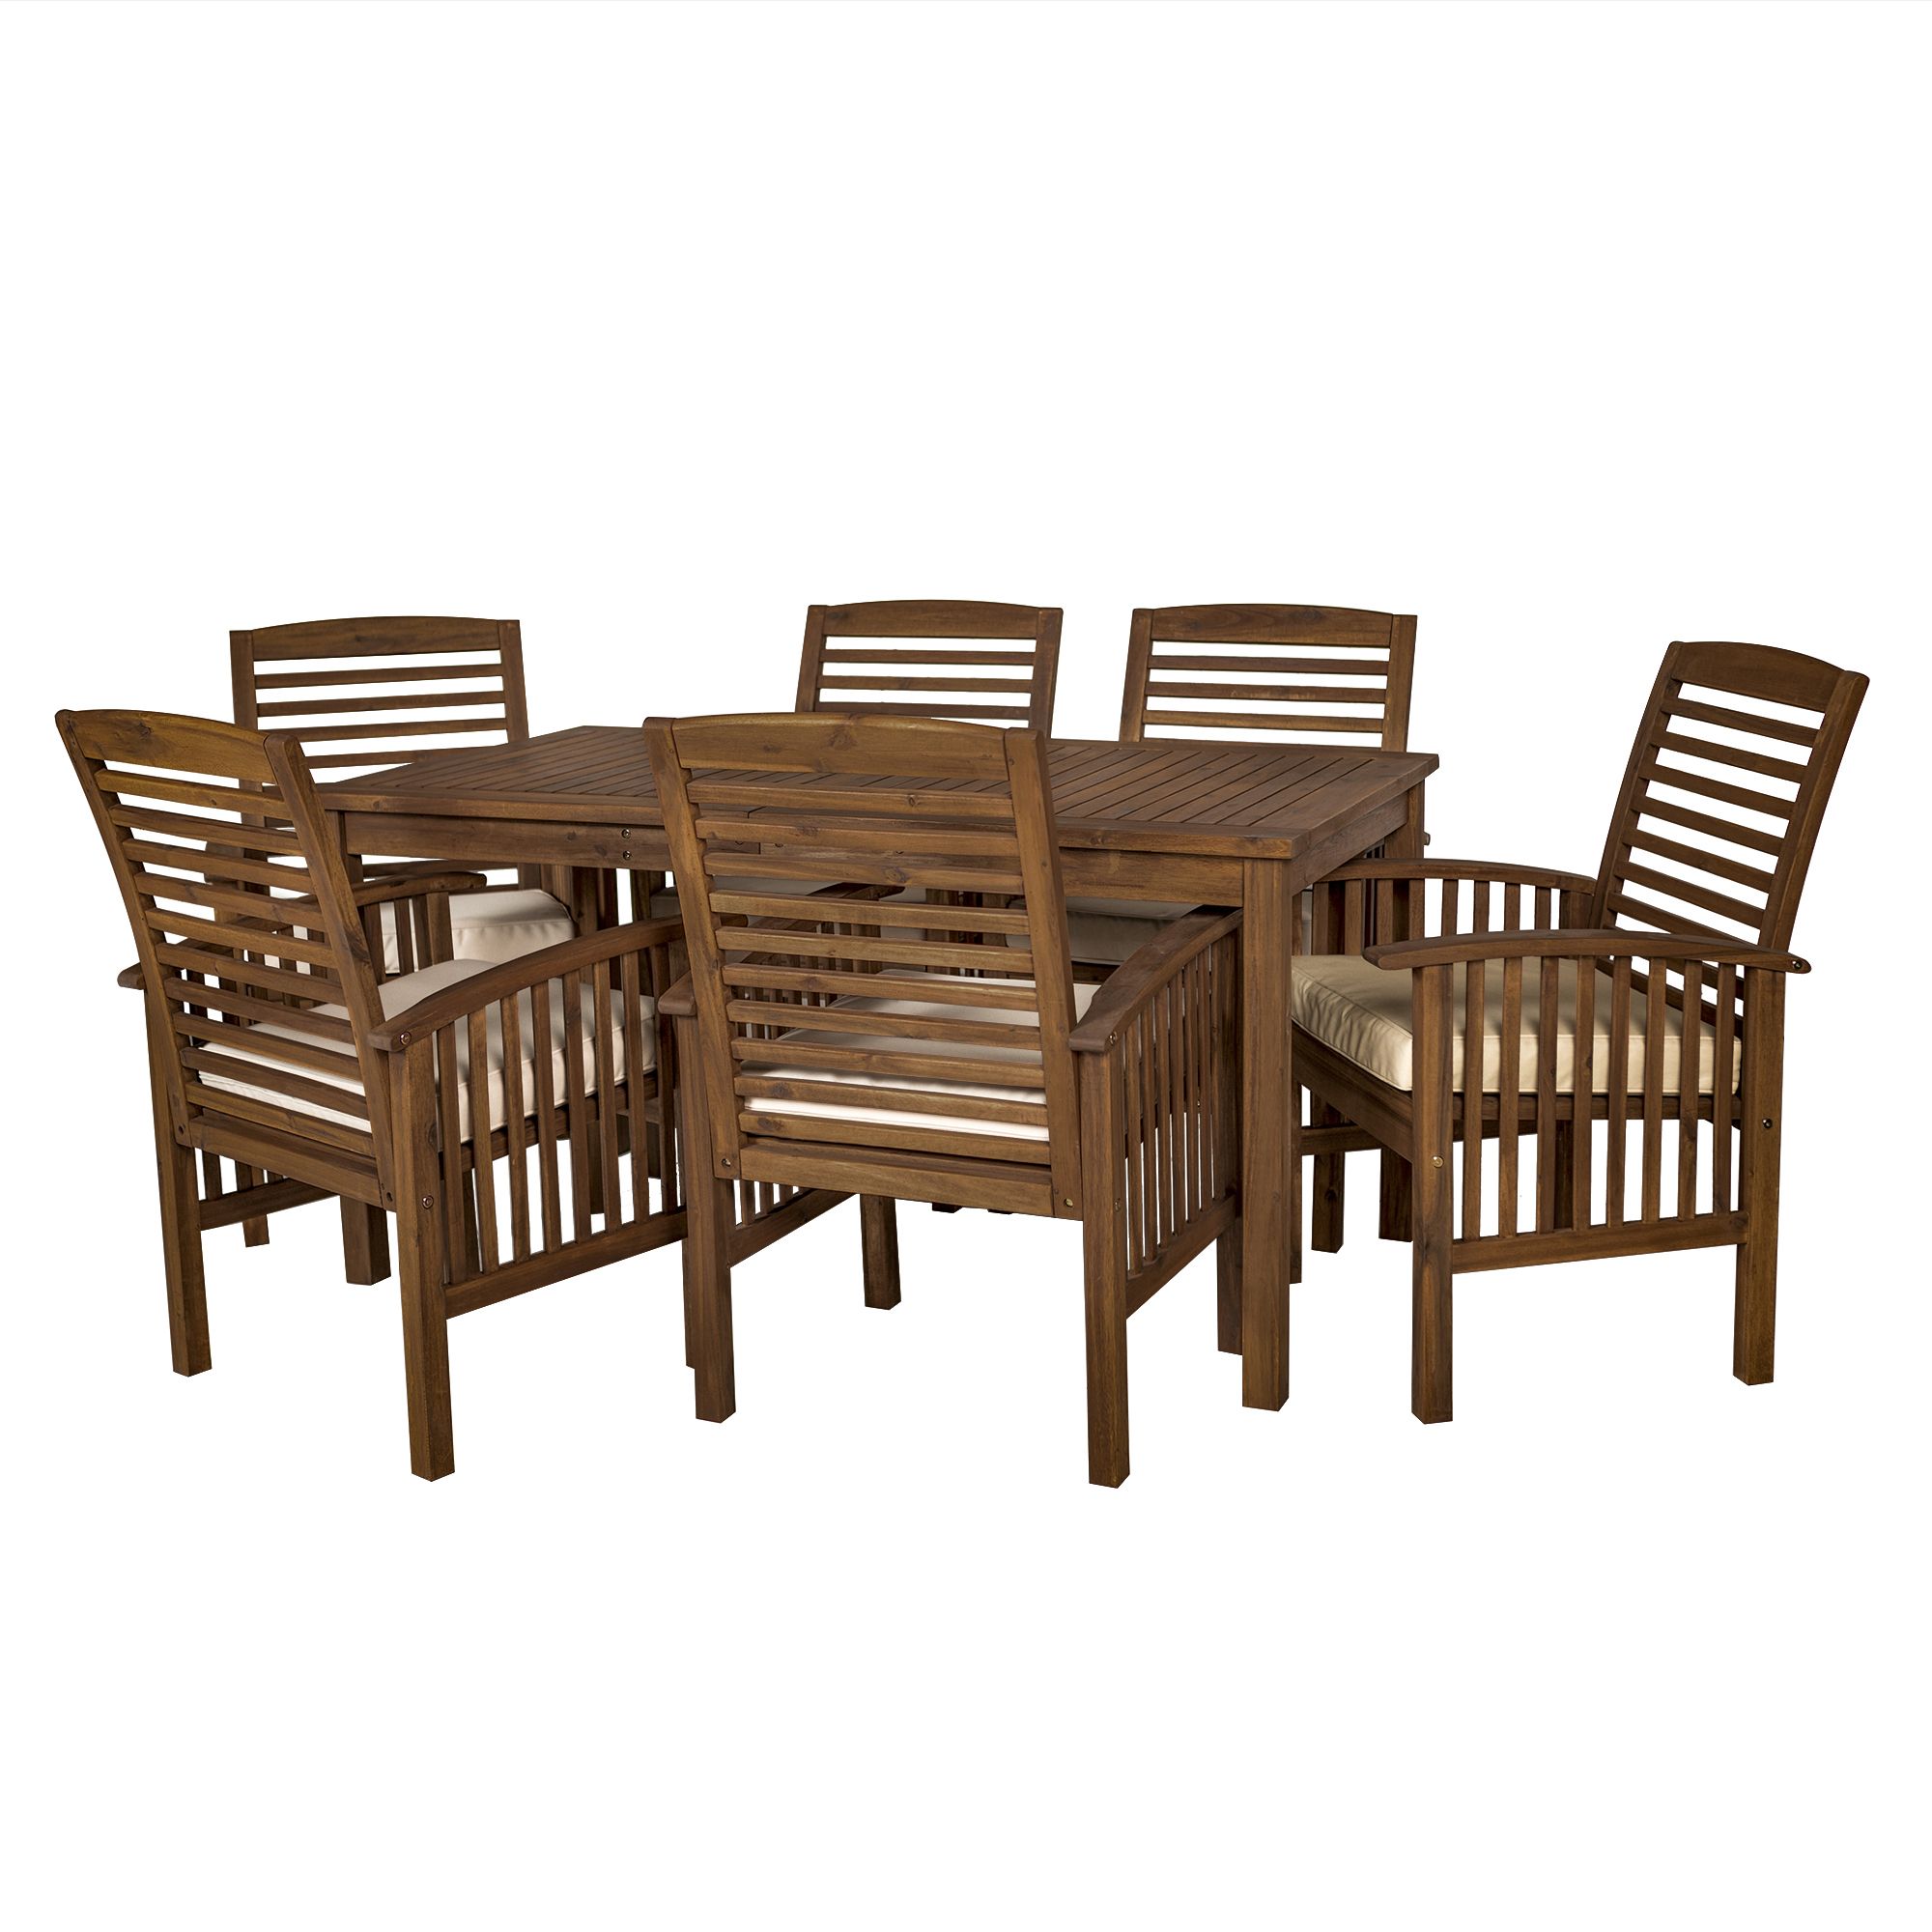 W. Trends 7-pc Outdoor Cliff Acacia Wood Dining Set - Brown